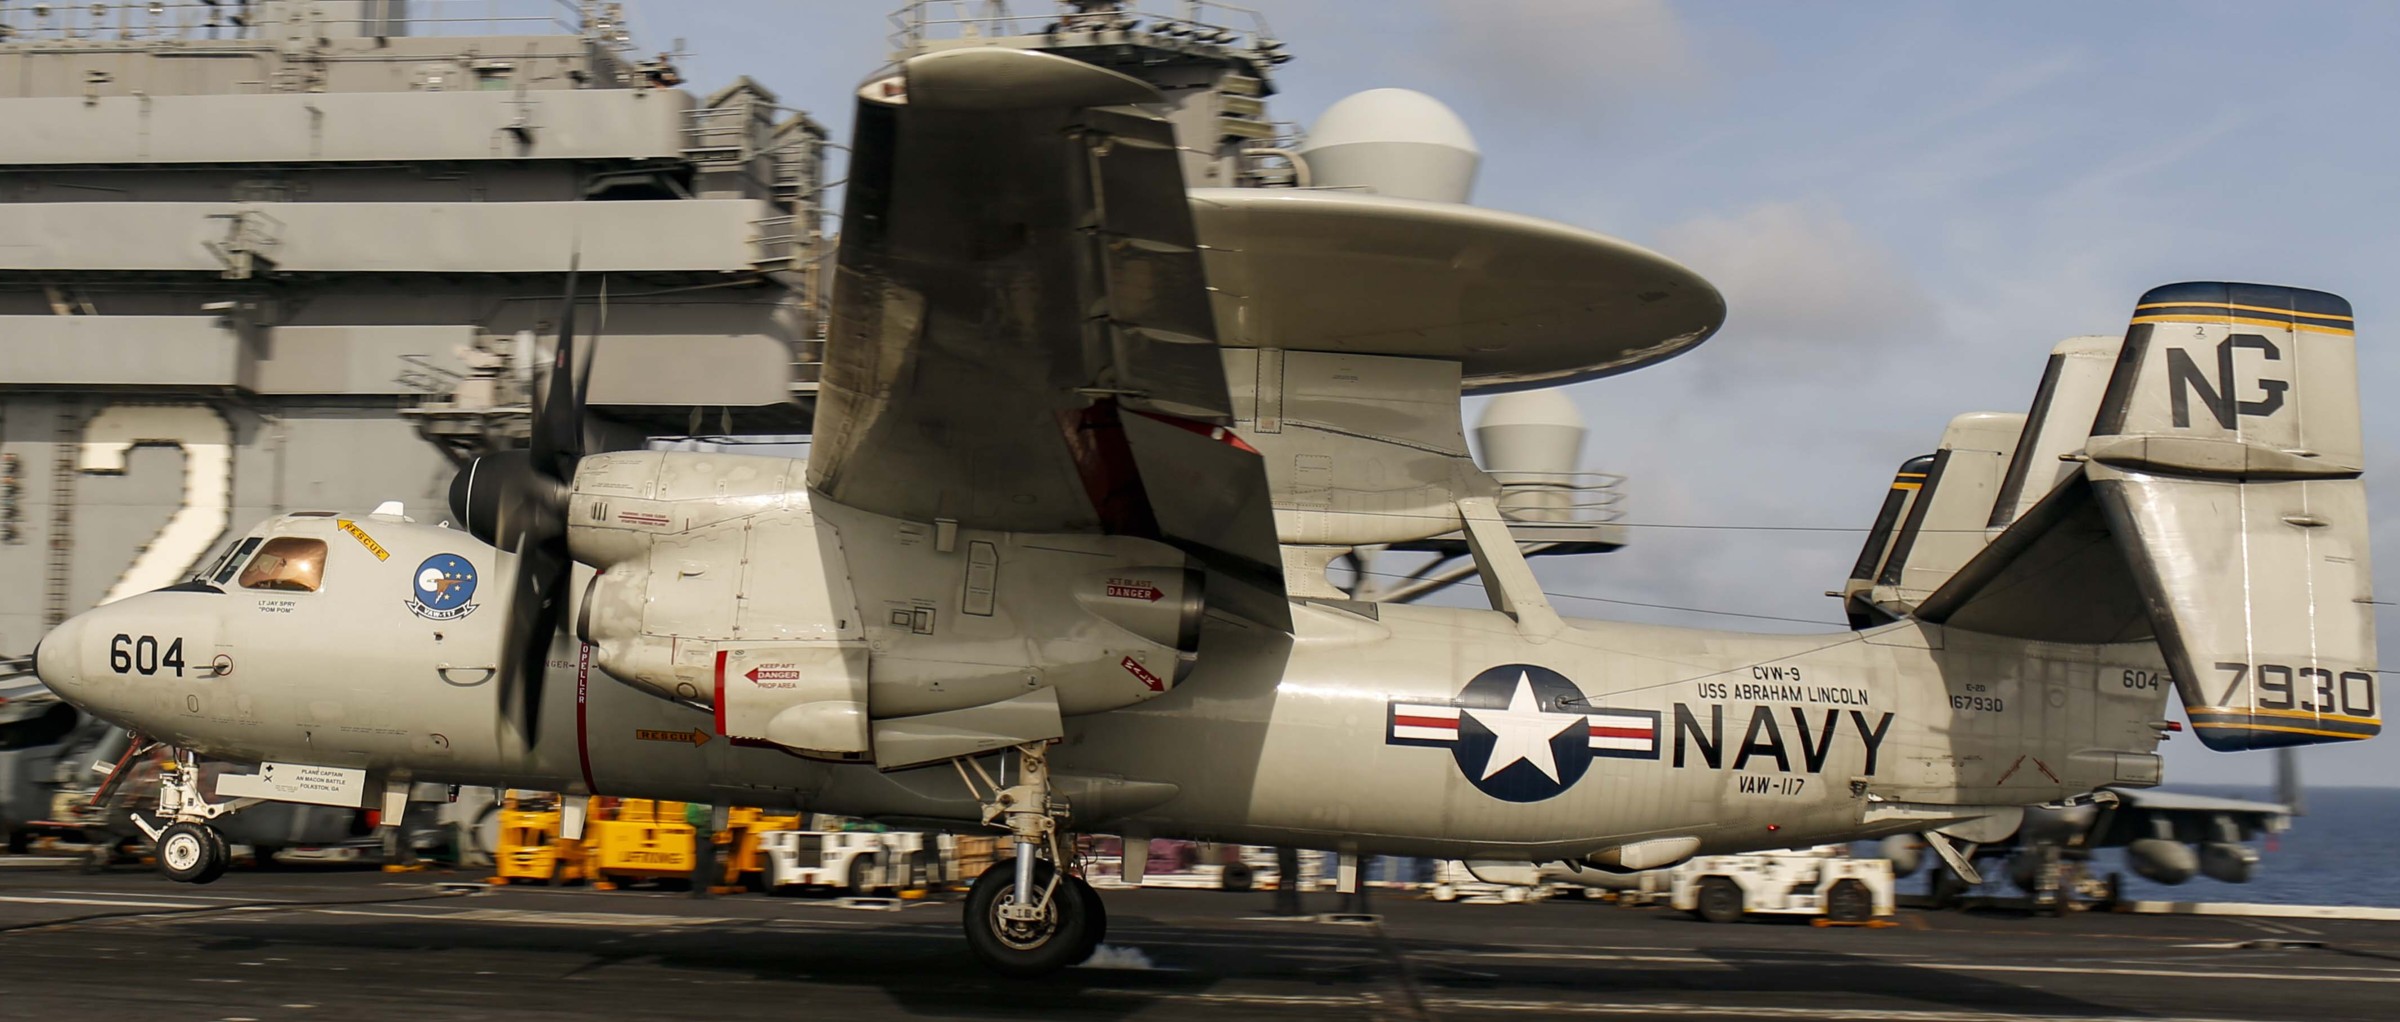 vaw-117 wallbangers airborne command and control squadron navy e-2d advanced hawkeye cvw-9 uss abraham lincoln cvn-72 32